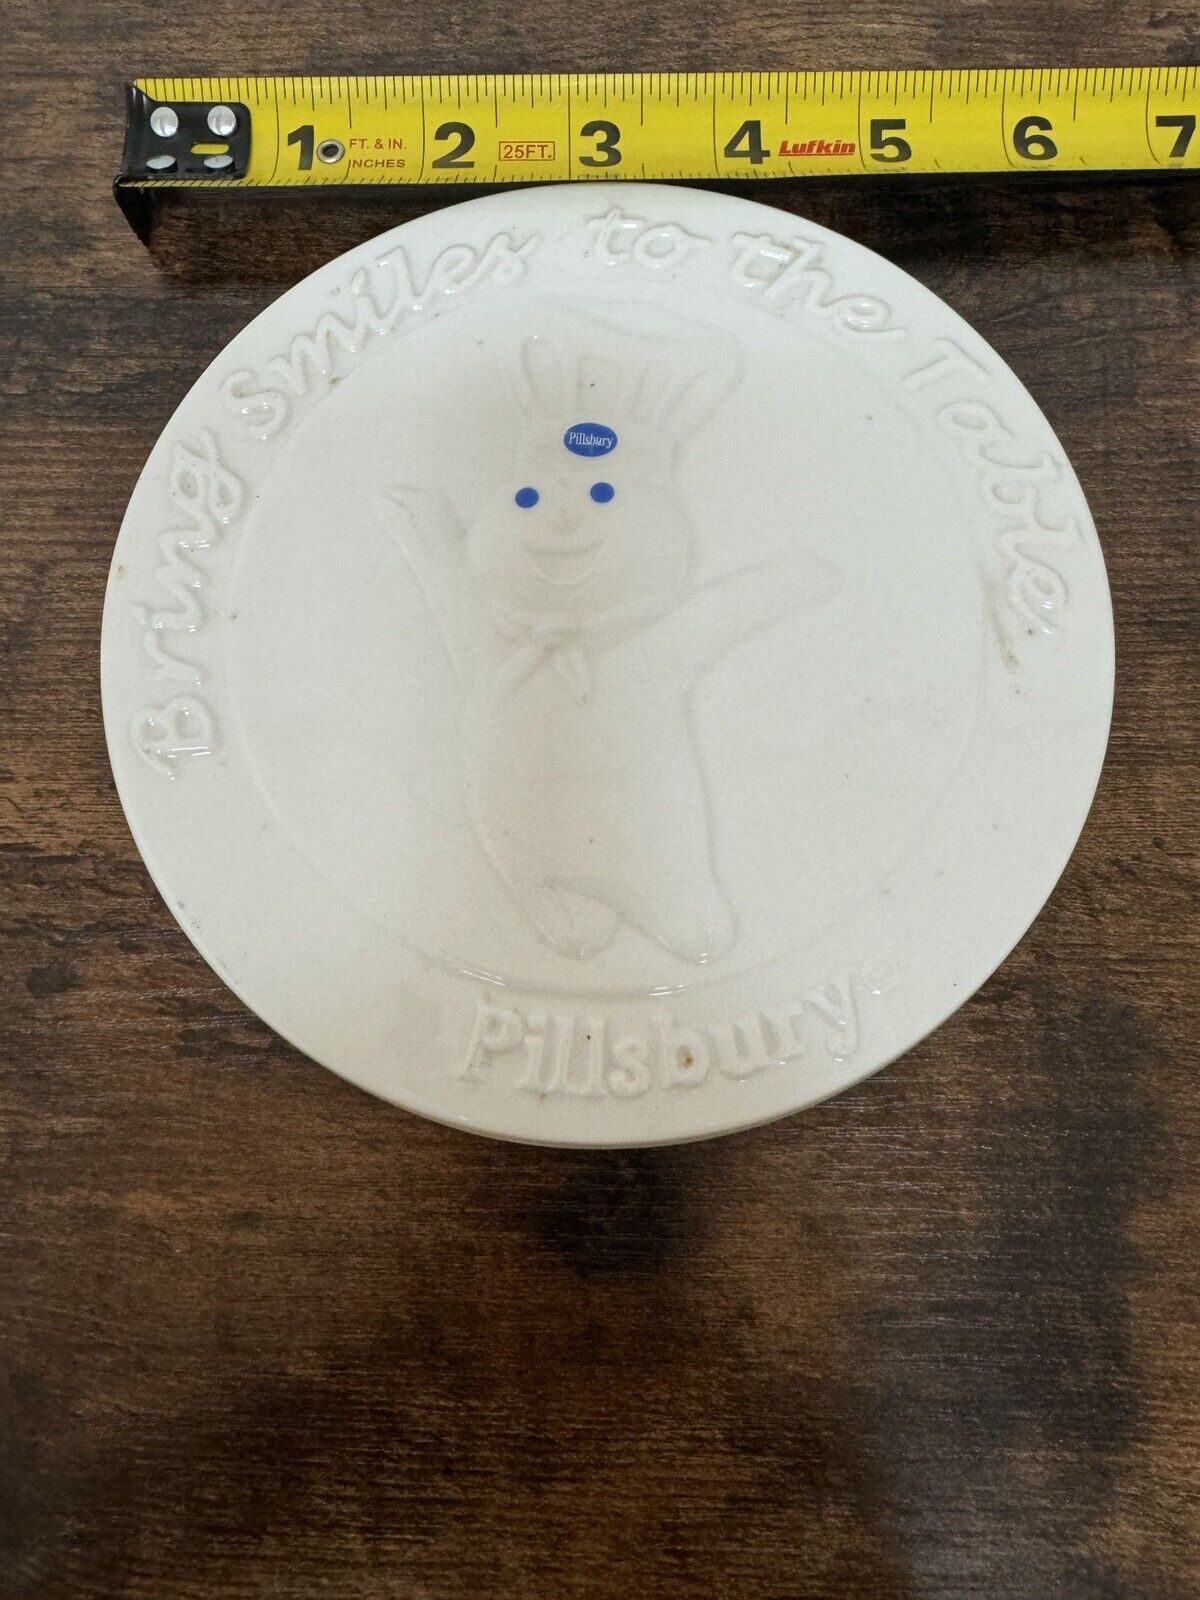 pillsbury doughboy Bring Smiles To The Table Trivet Round